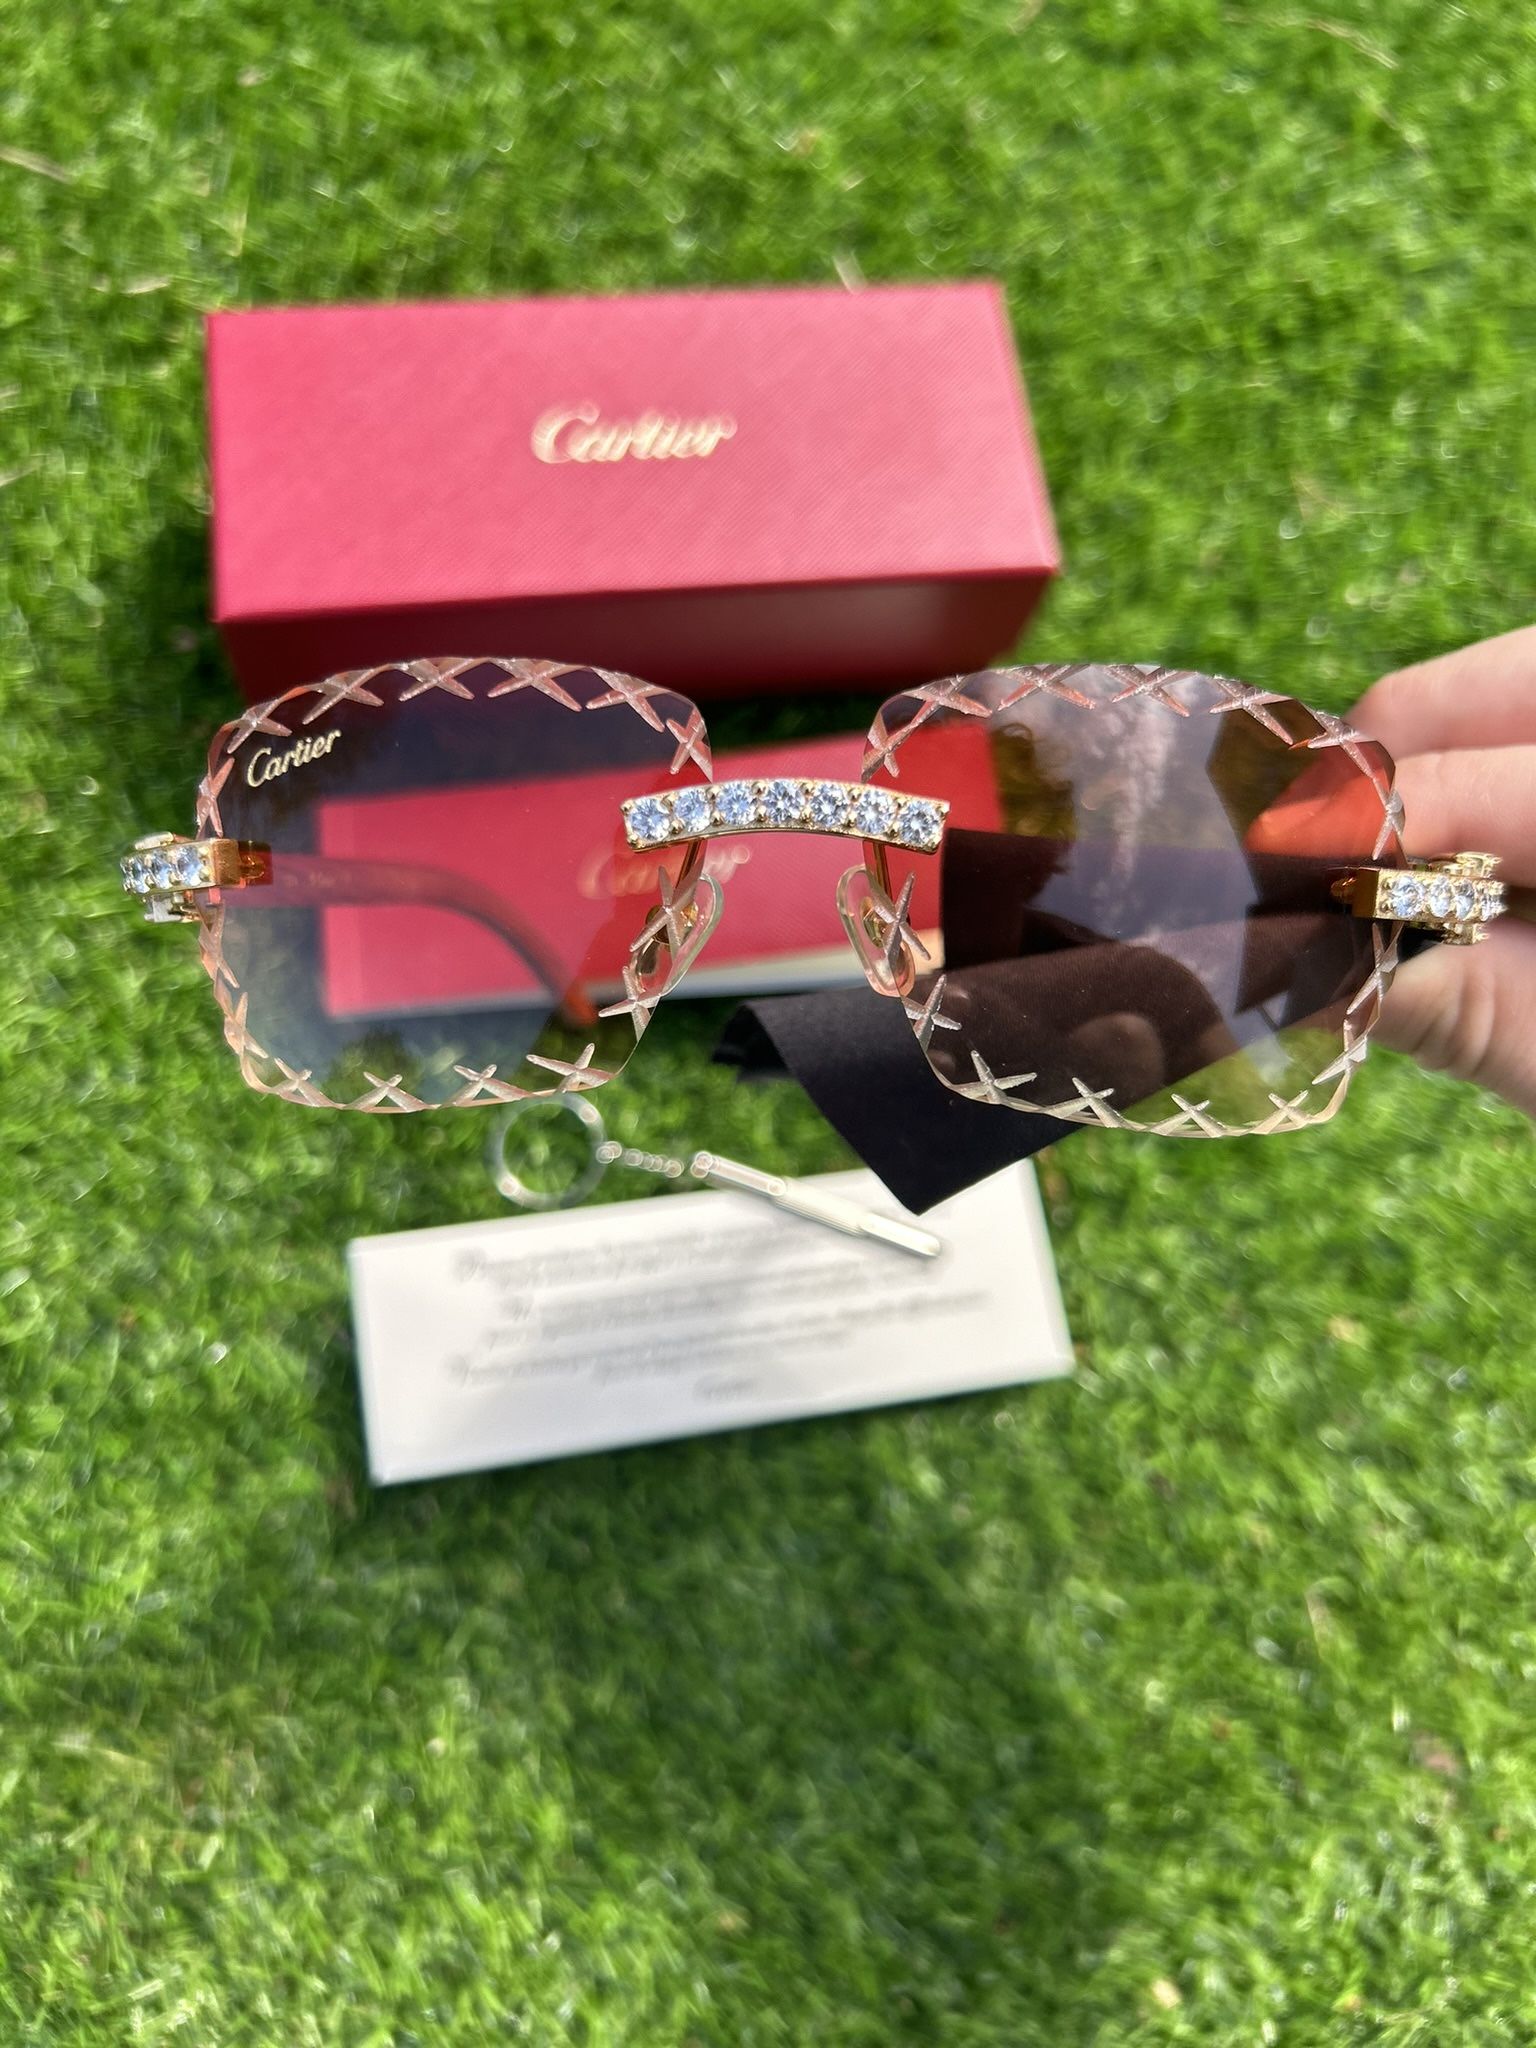 Cartier Glasses (Exclusive price) Low stock get now!!